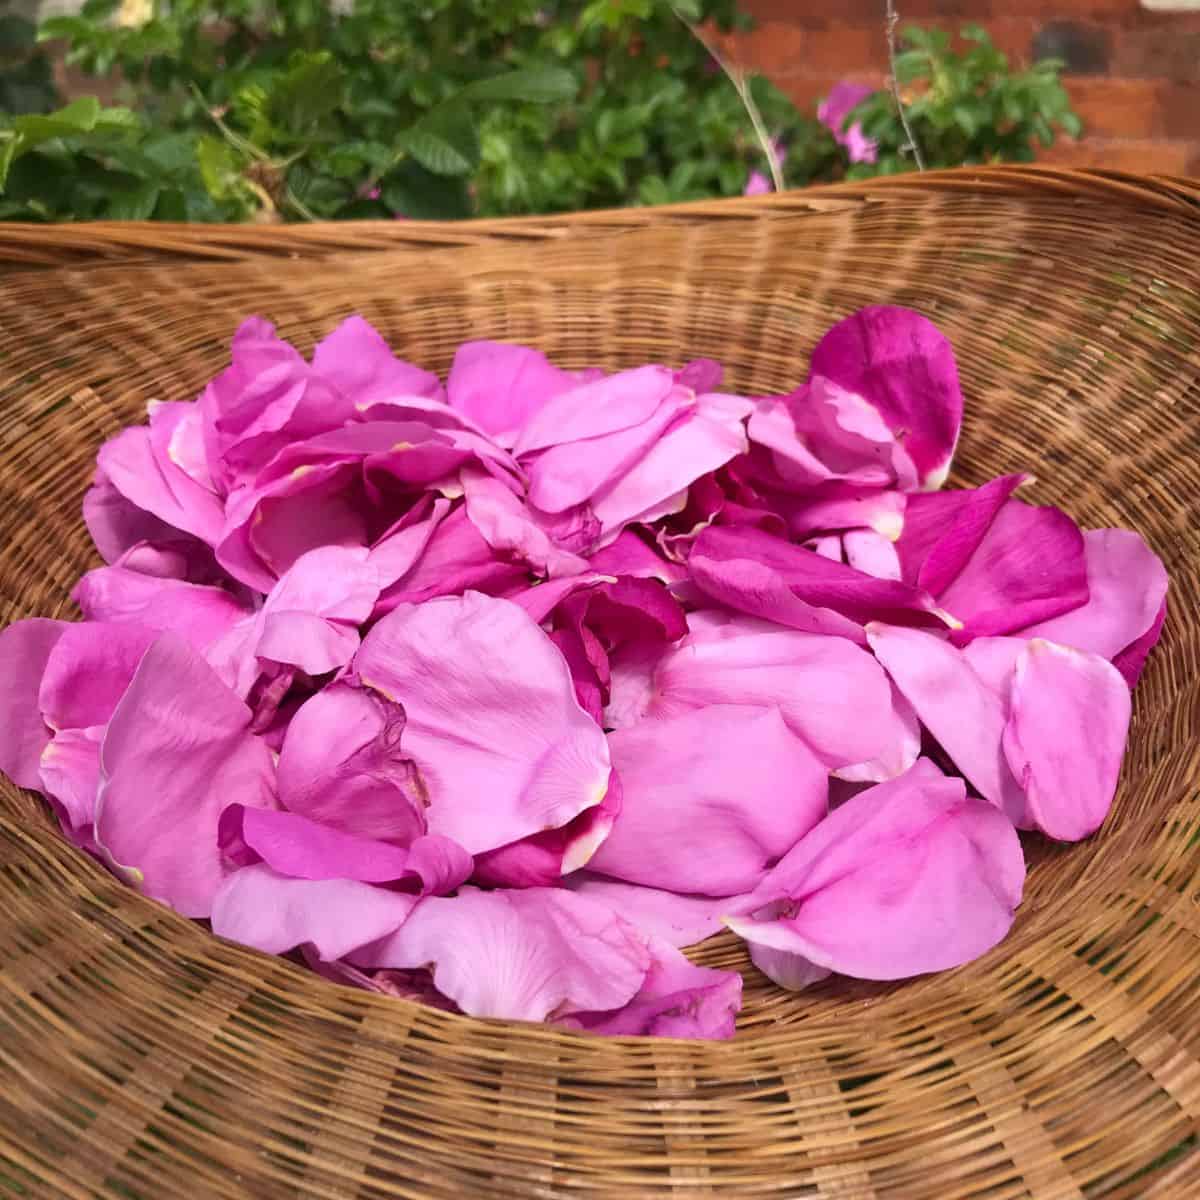 Close up of pink foraged rose ragusa petals in a wicker basket.